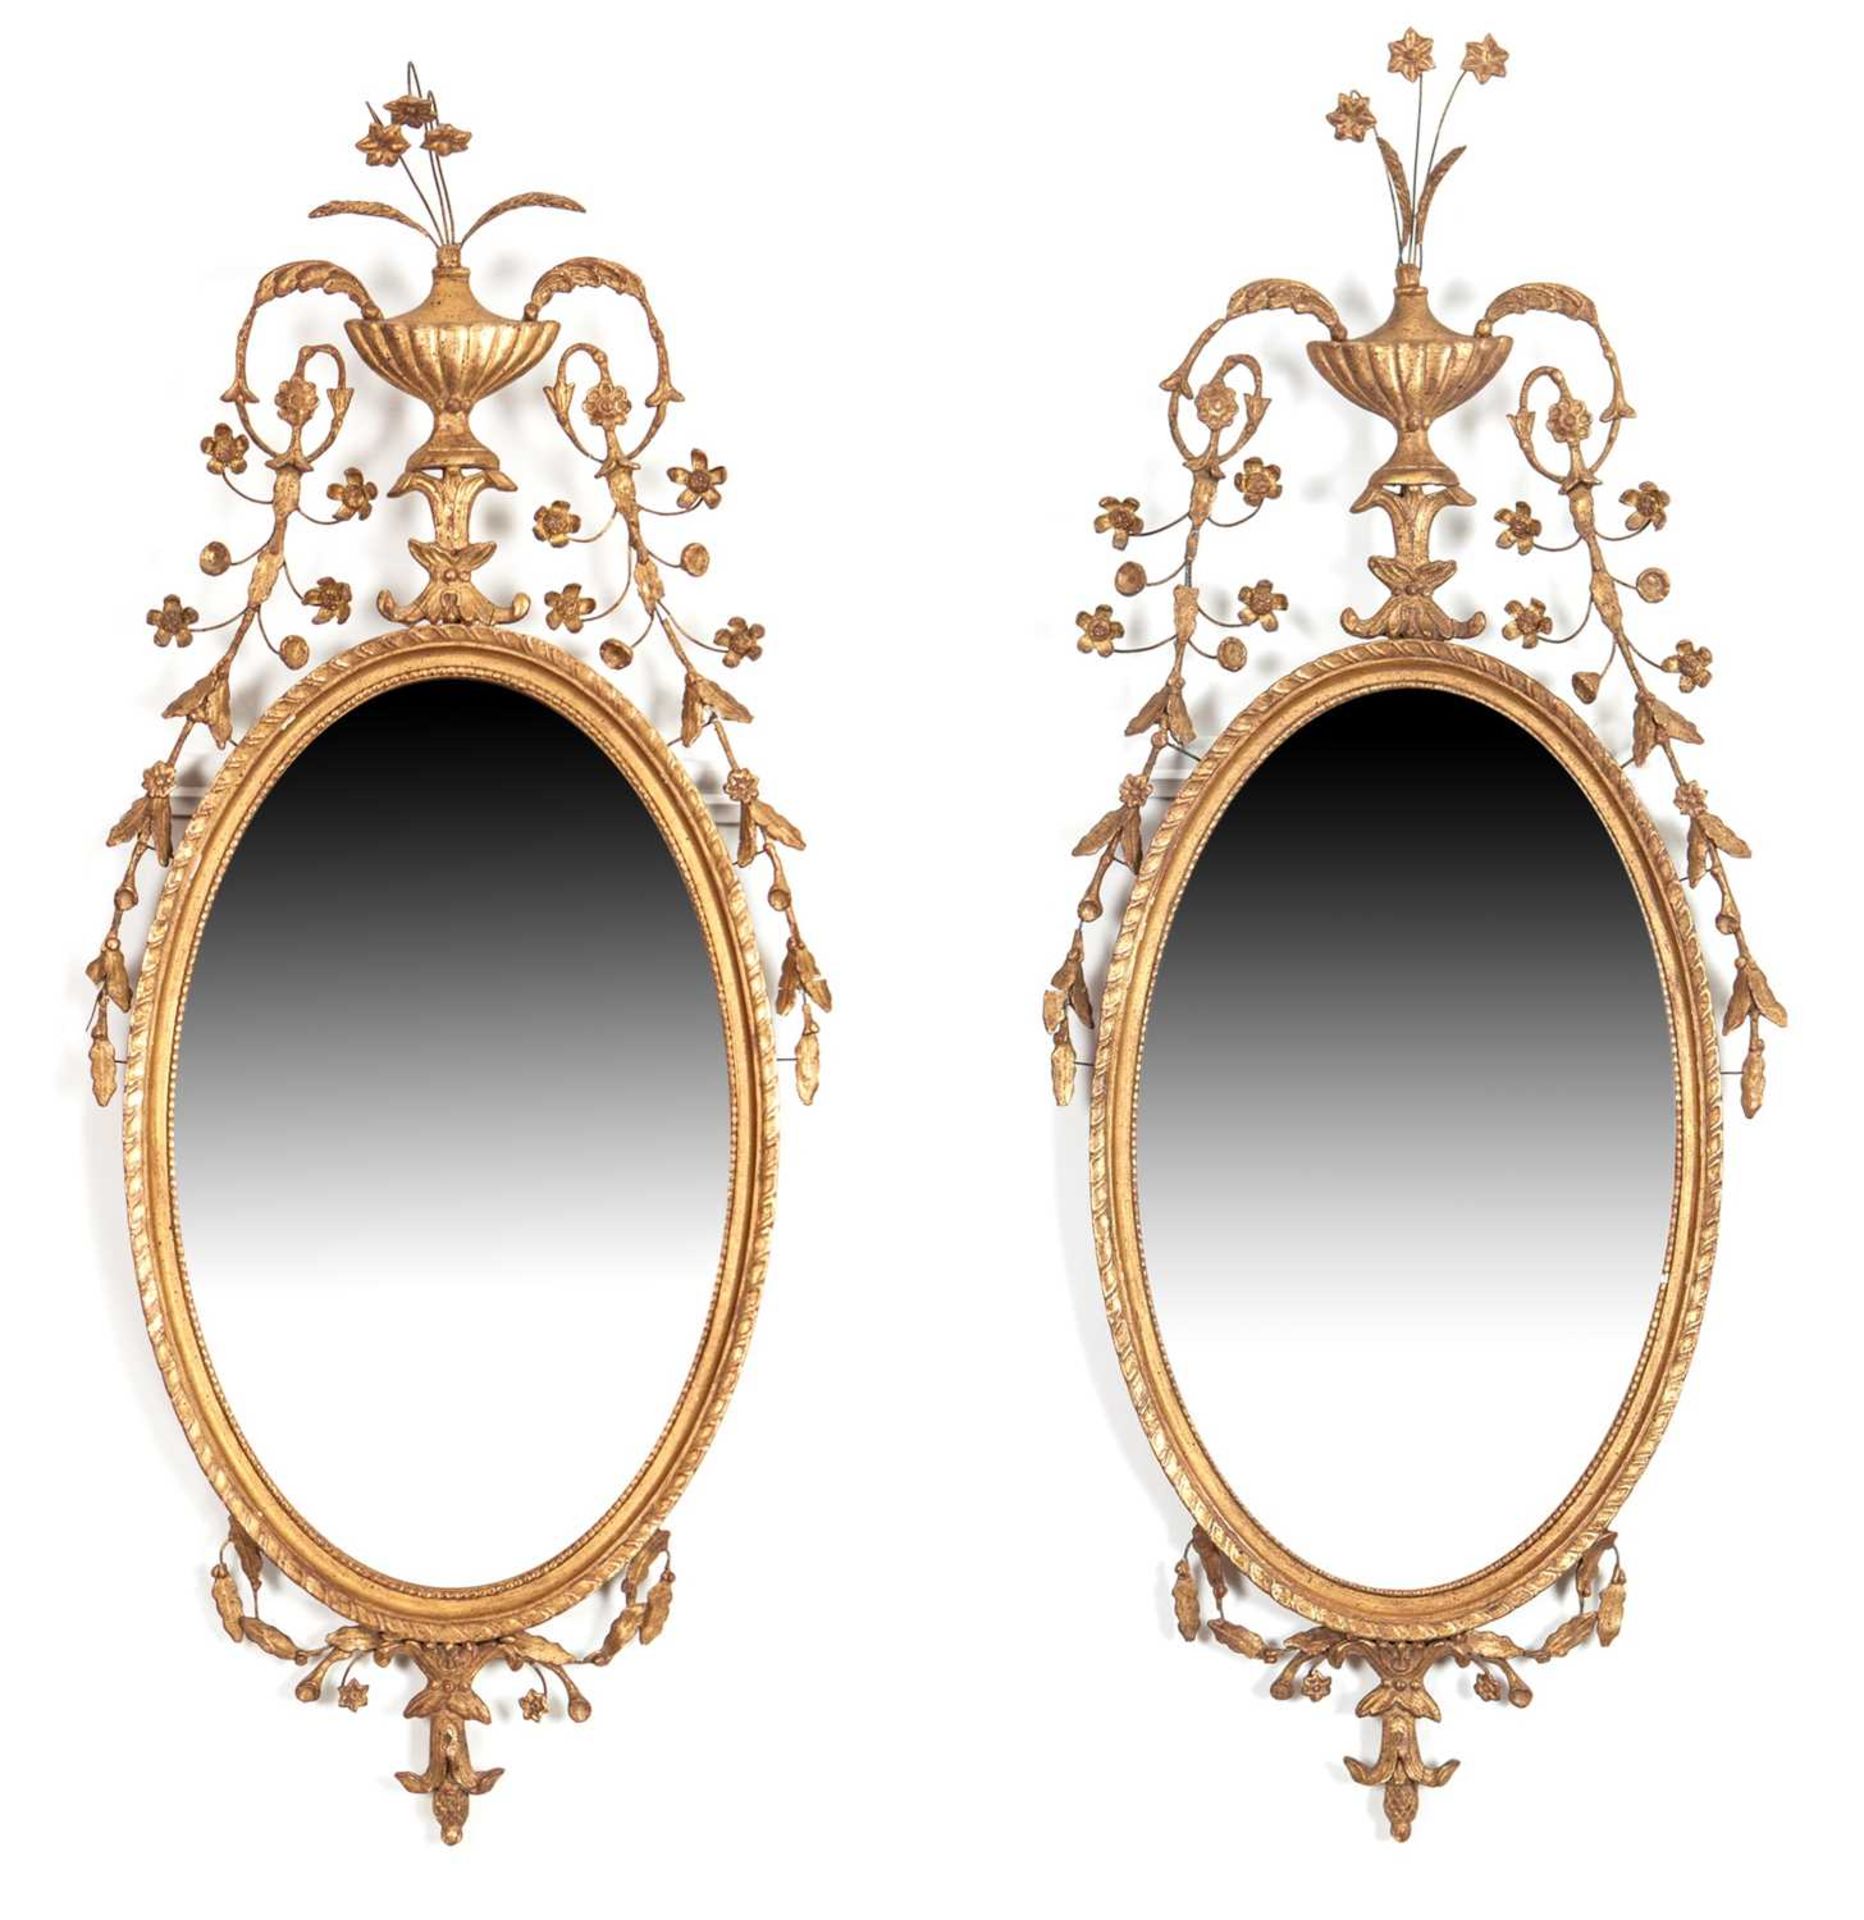 A PAIR OF LATE 19TH CENTURY GILTWOOD WALL MIRRORS